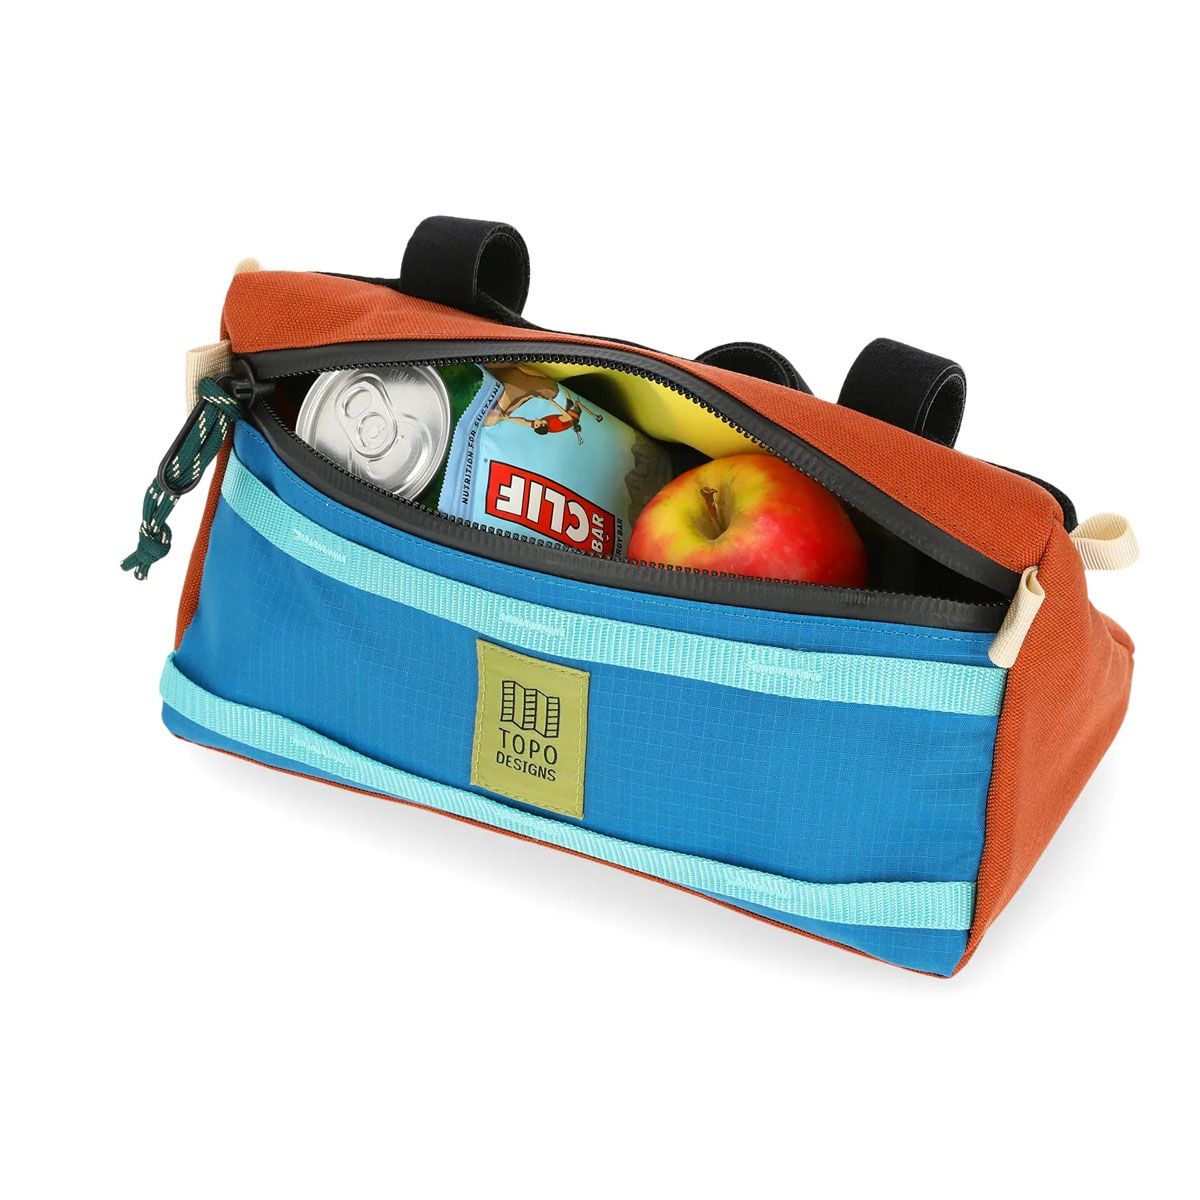 Topo Designs Bike Bag, provides a place to stash everything from tools and tubes to an extra layer or essential snacks